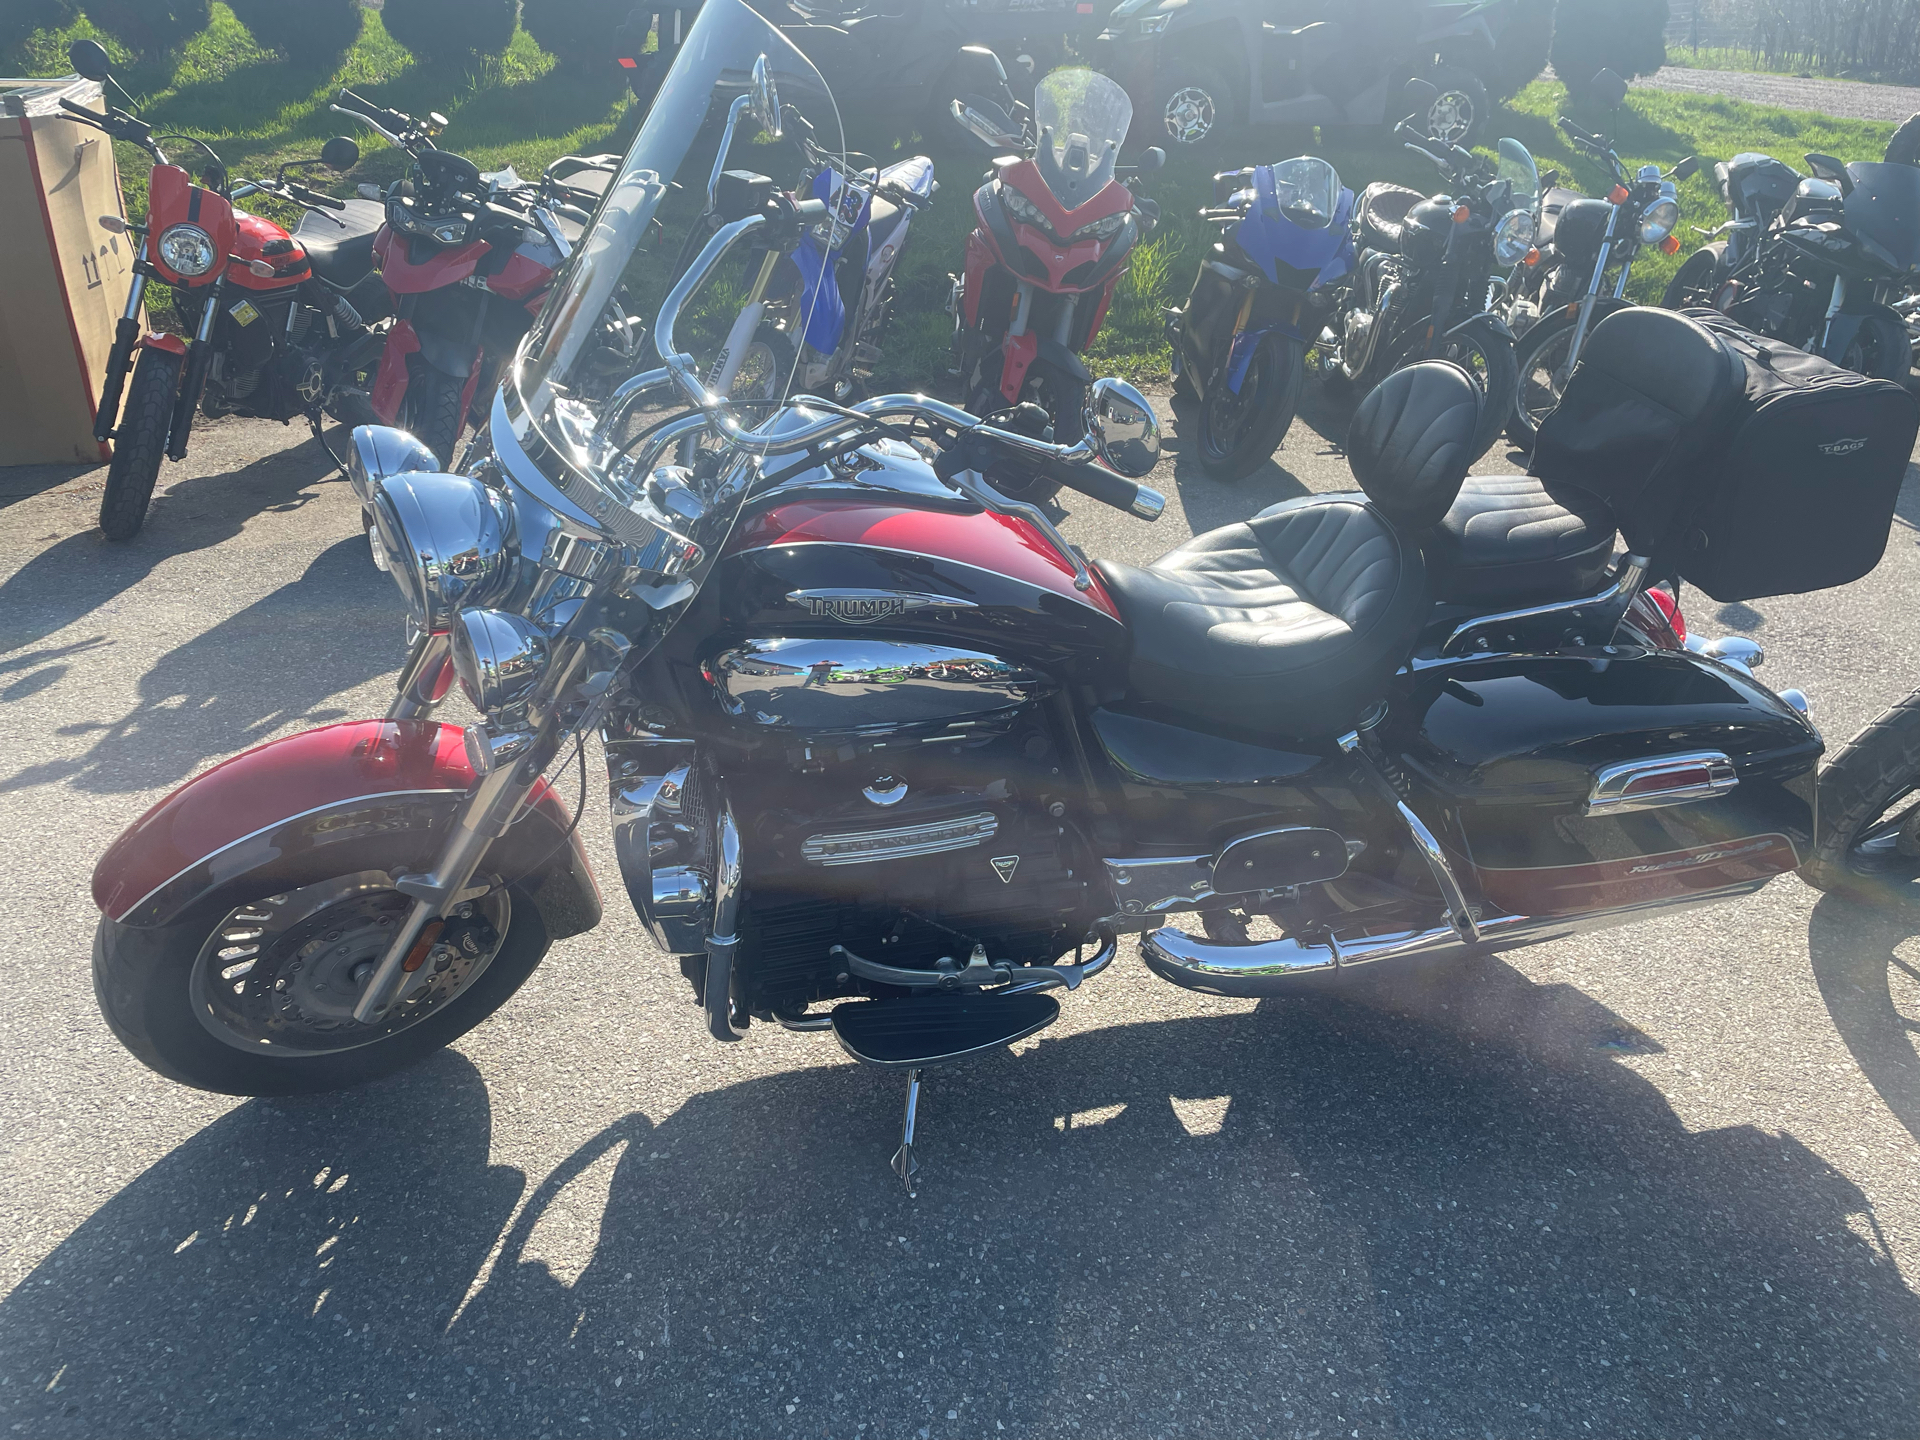 2008 Triumph Rocket III Touring in New Haven, Vermont - Photo 3